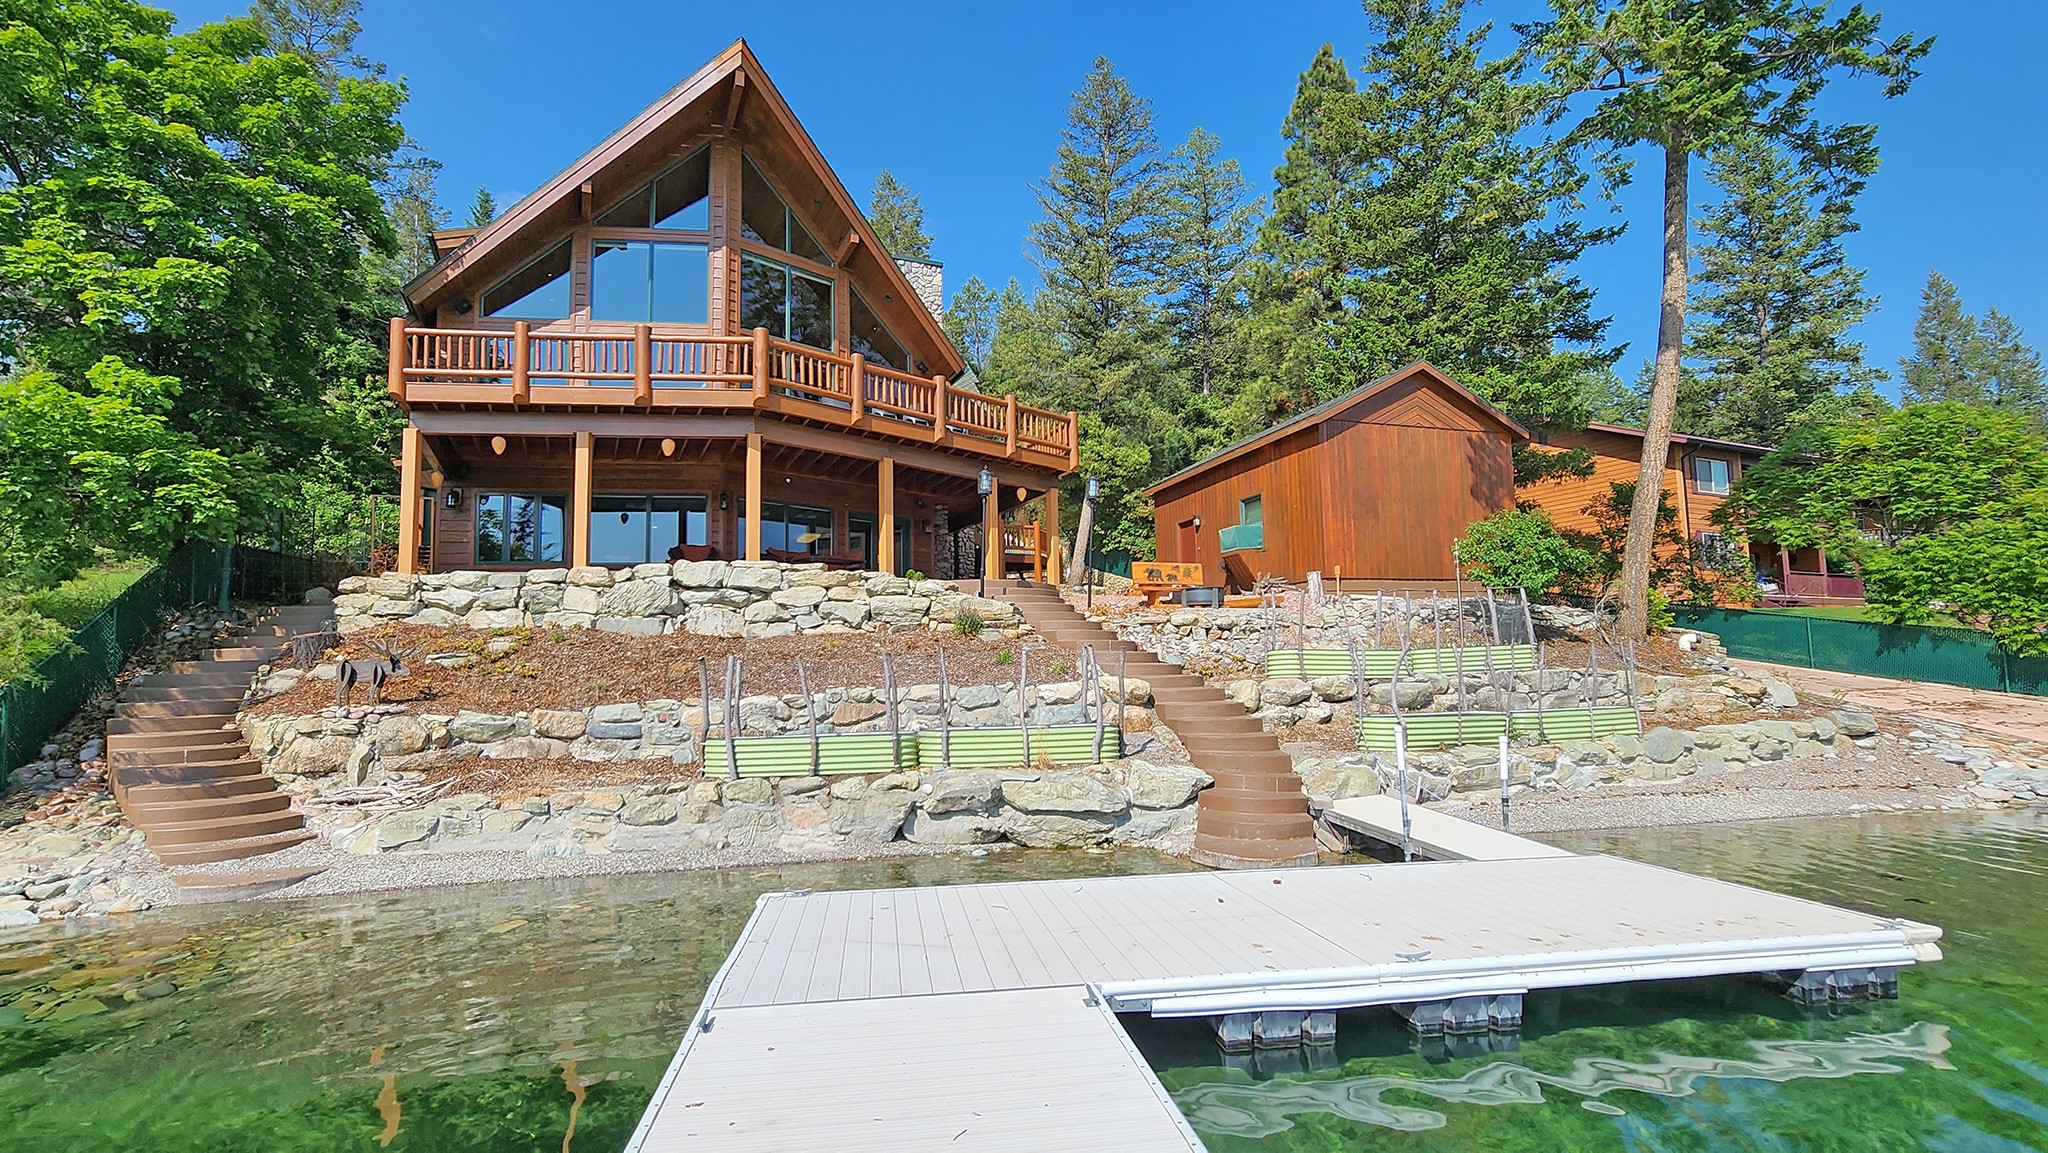 Grand Foys Lake home with lovely north views over aqua waters, Minutes from Kalispell this custom home has a climate controlled boathouse and a rare, private boat launch along 107 ft frontage.  Large windows and cathedral ceiling in the Great Room with rock fireplace enjoys the lake views. An ample kitchen has room for more than one cook, or use the 2nd kitchen in the lower level to feed a crowd. Entertain on the deck or lower patio overlooking the lake! Top floor loft is solely the primary bedroom suite overlooking the great room and has large bath with soaking tub, shower and roomy closet. Home was designed to add an elevator reaching all 3 levels if desired. Finishing the home are a lower Family Room, two more bedrooms and a bonus room, two laundry areas.  Private gate enters onto the concrete driveway, property is fenced and has alarm system. Short drive to Herron Park and within an hour from Flathead Lake, Glacier National Park and skiing at Whitefish Mountain Resort.